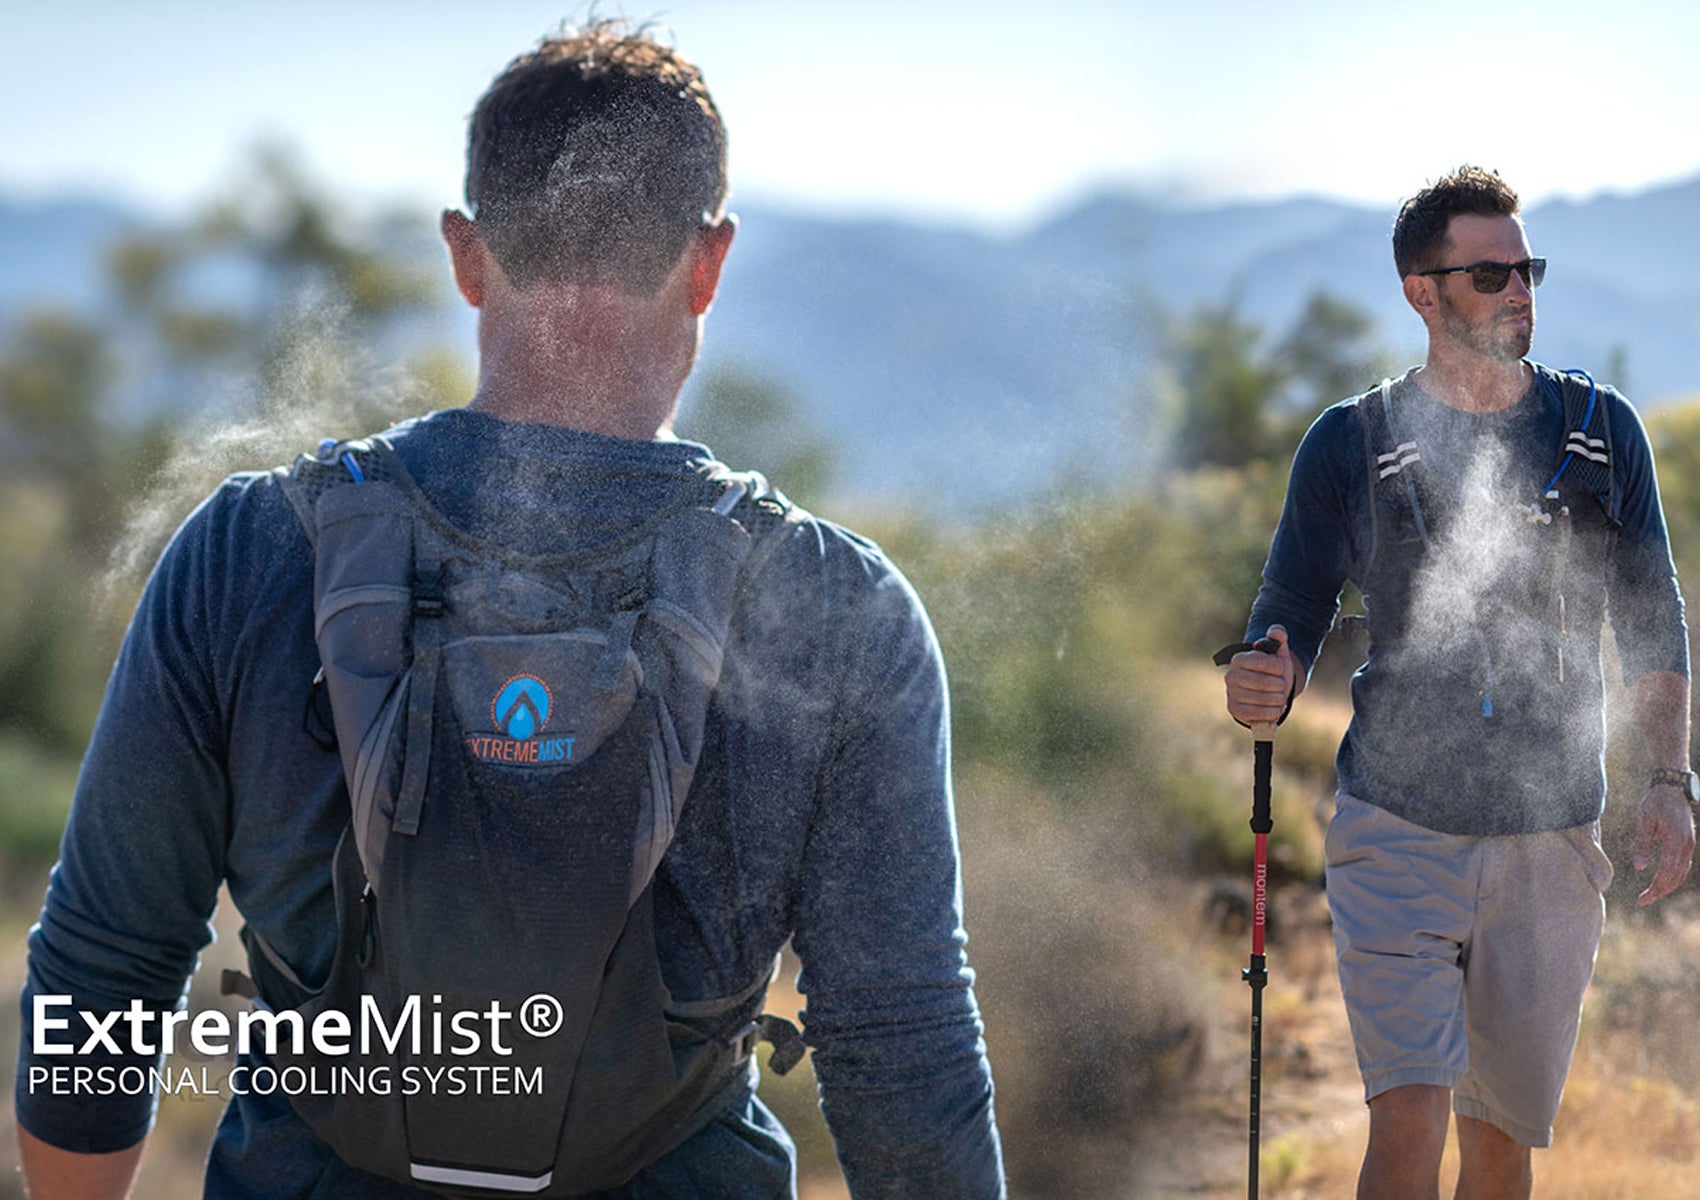 Misting & Drinking Hydration Backpack